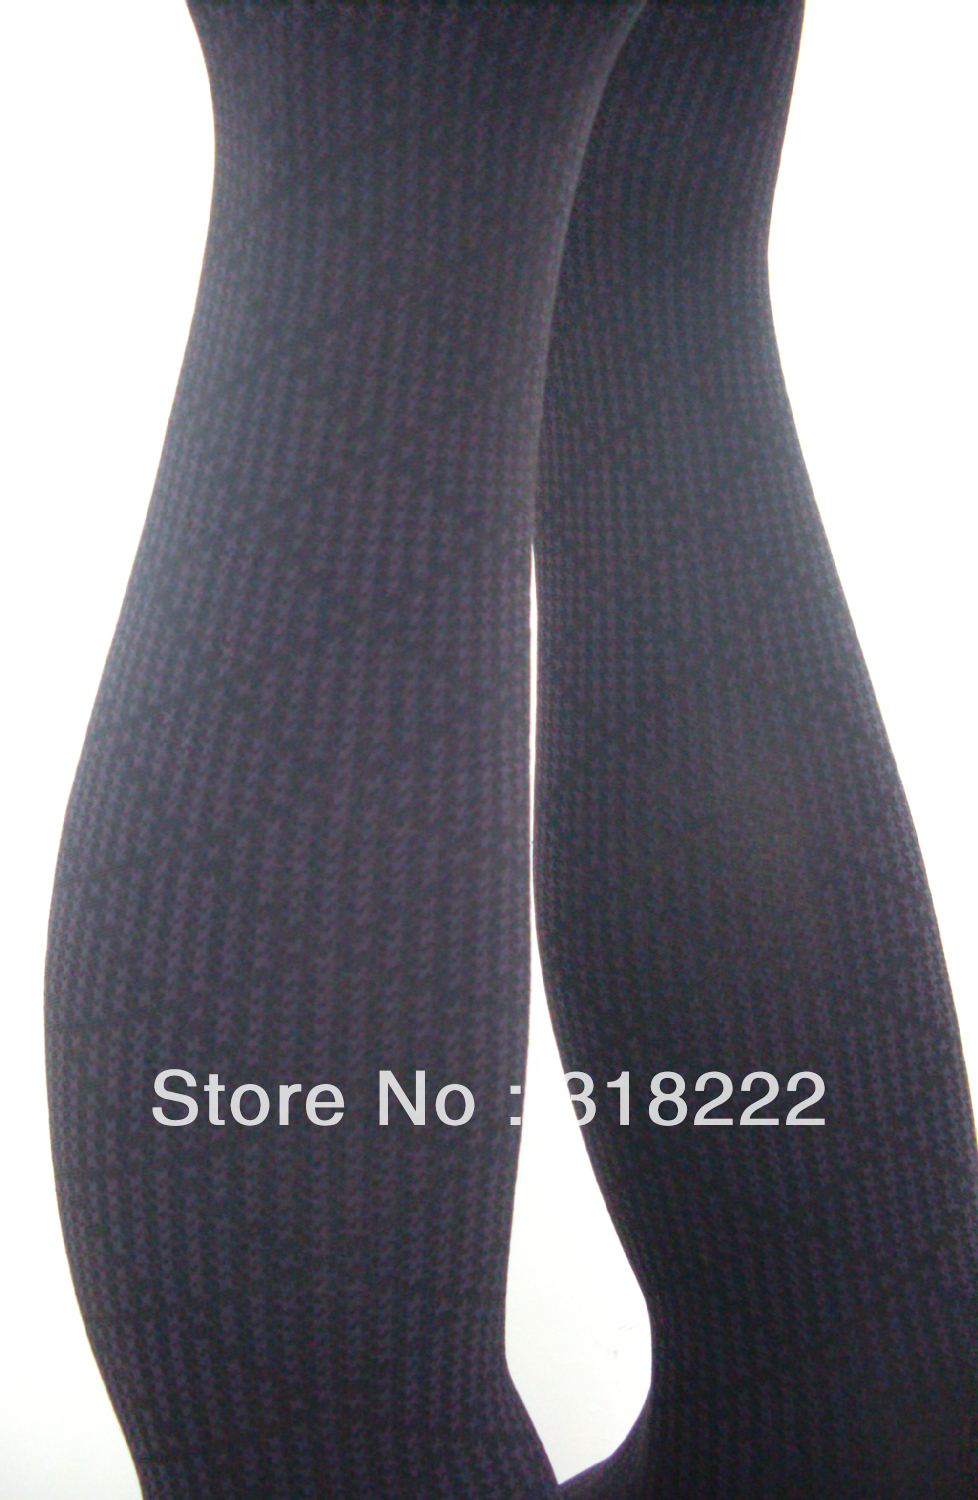 Fashion diamond dogstooth pattern tight sexy lady tights in purple color good leg warmer free shipping great gift for Valentine